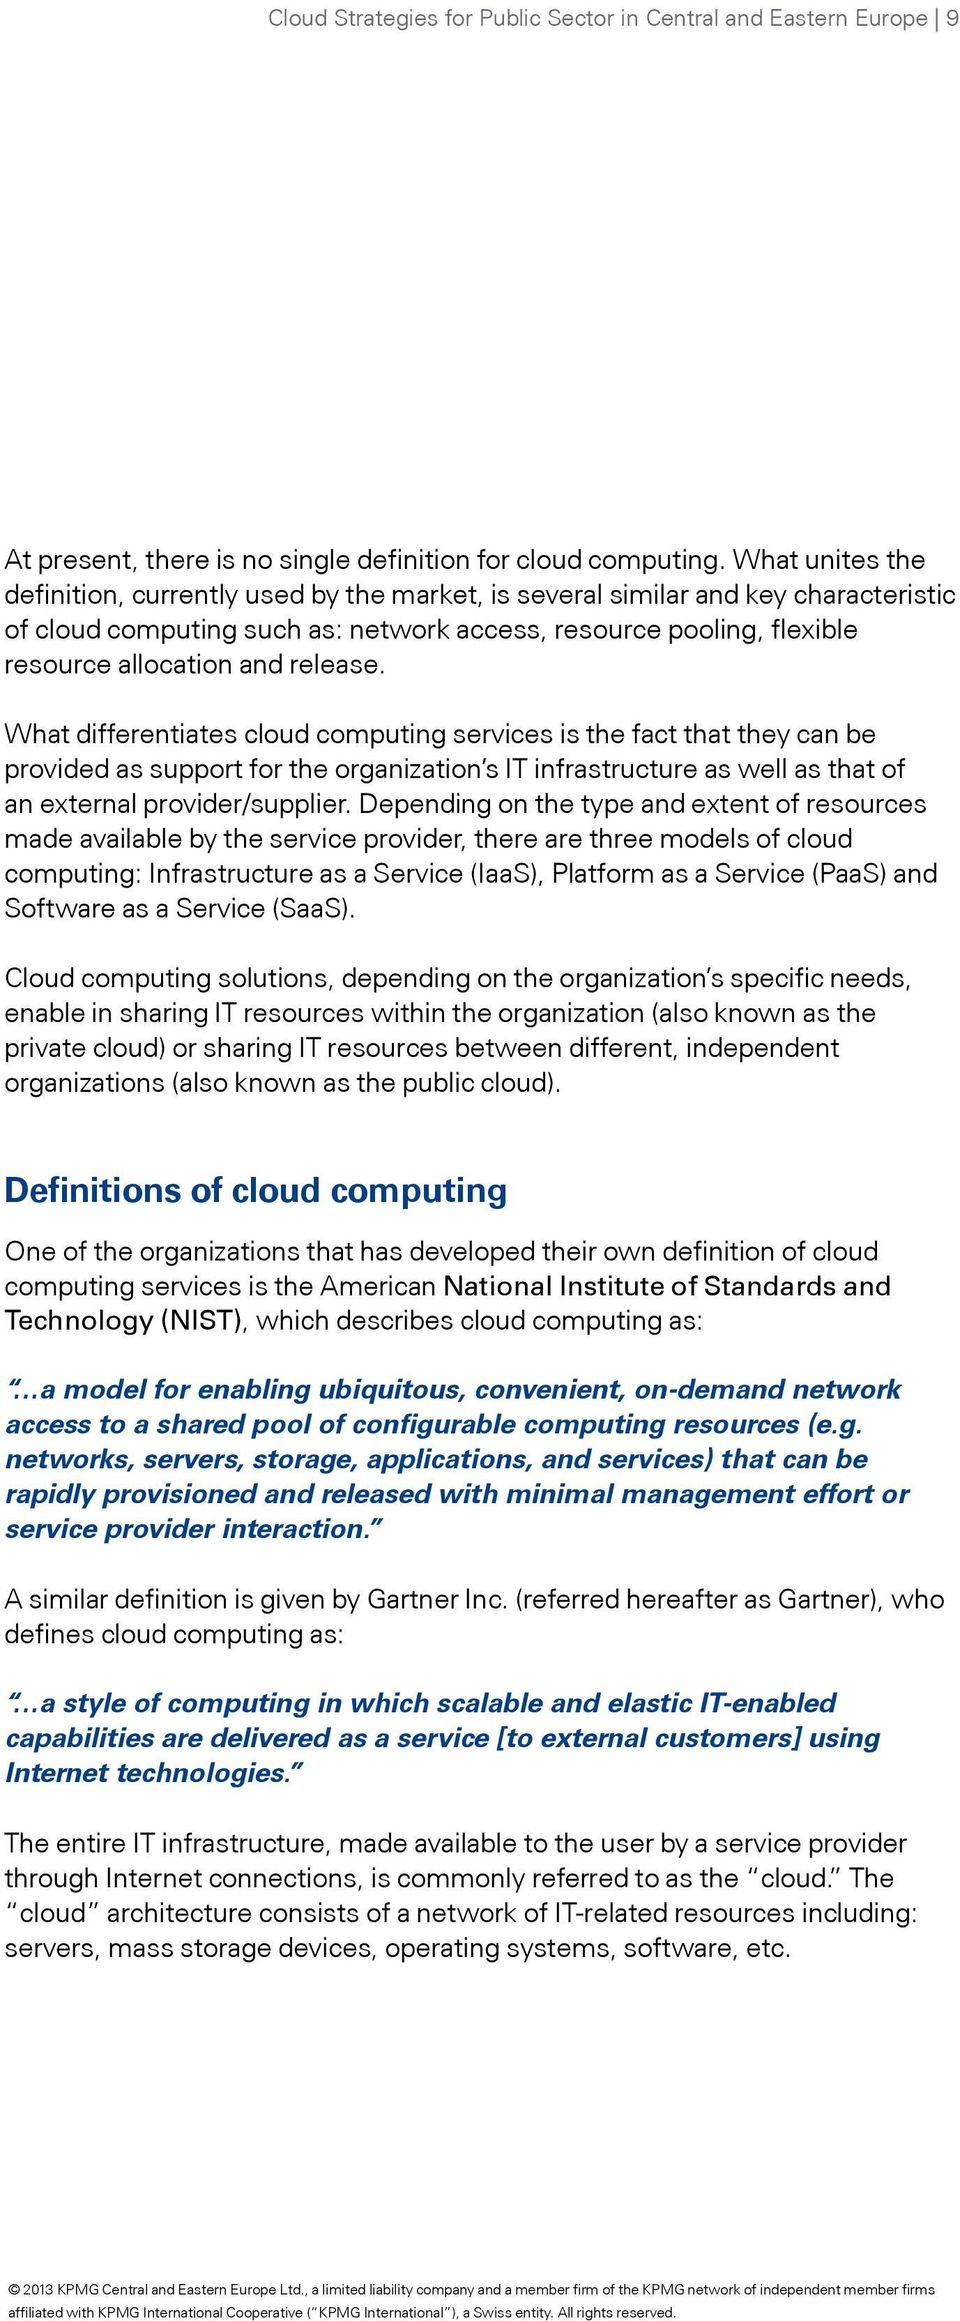 release. What differentiates cloud computing services is the fact that they can be provided as support for the organization s IT infrastructure as well as that of an external provider/supplier.